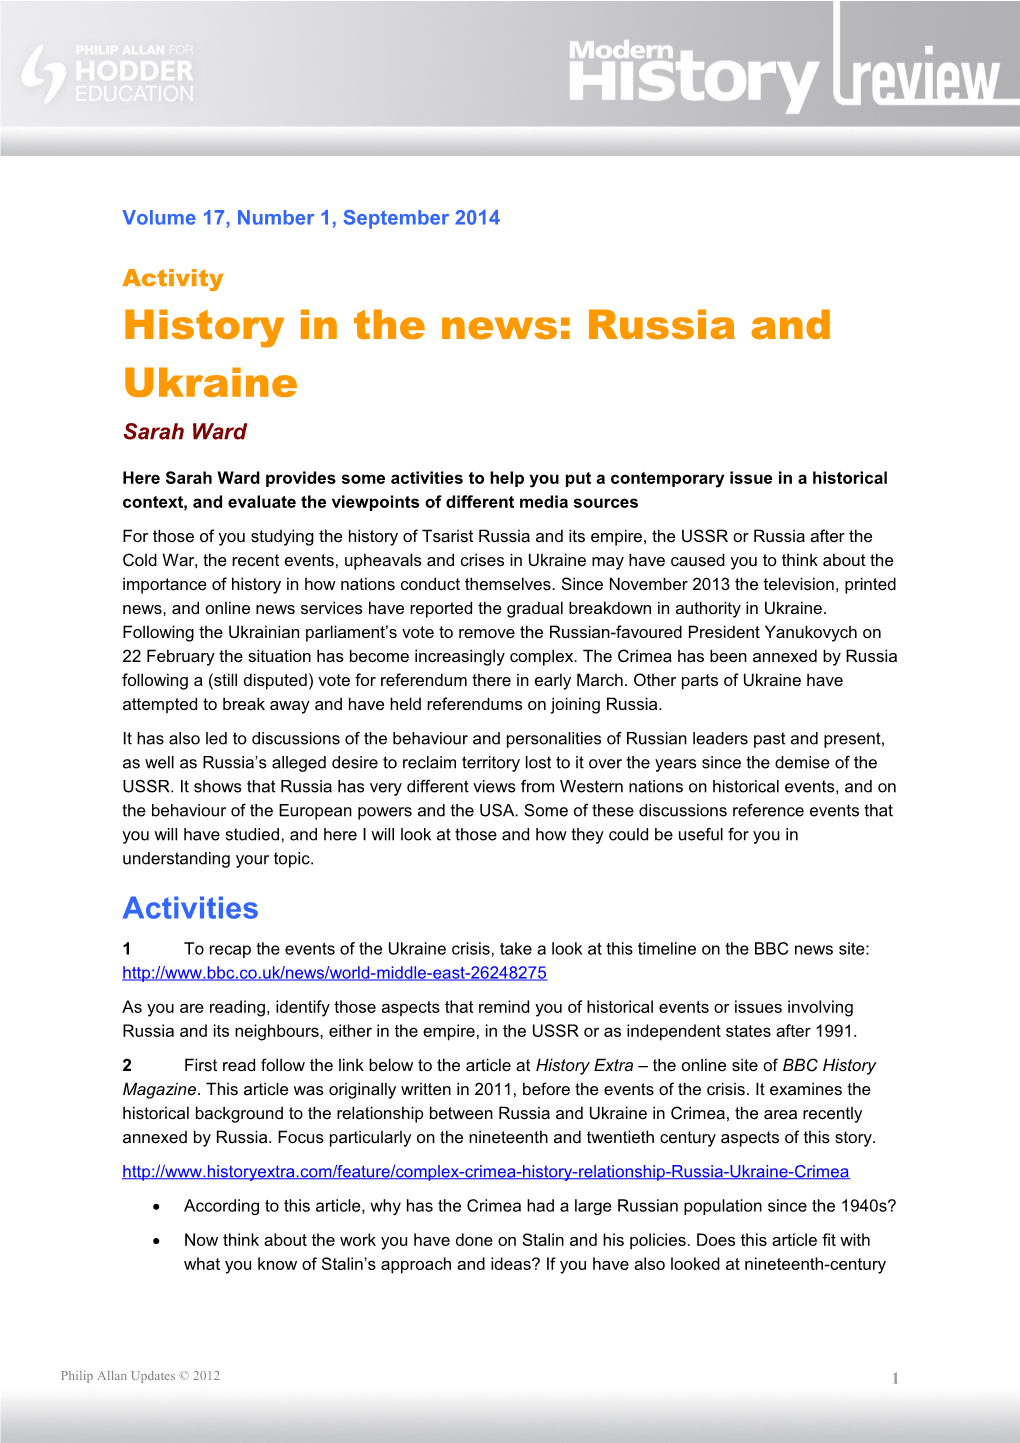 History in the News: Russia and Ukraine